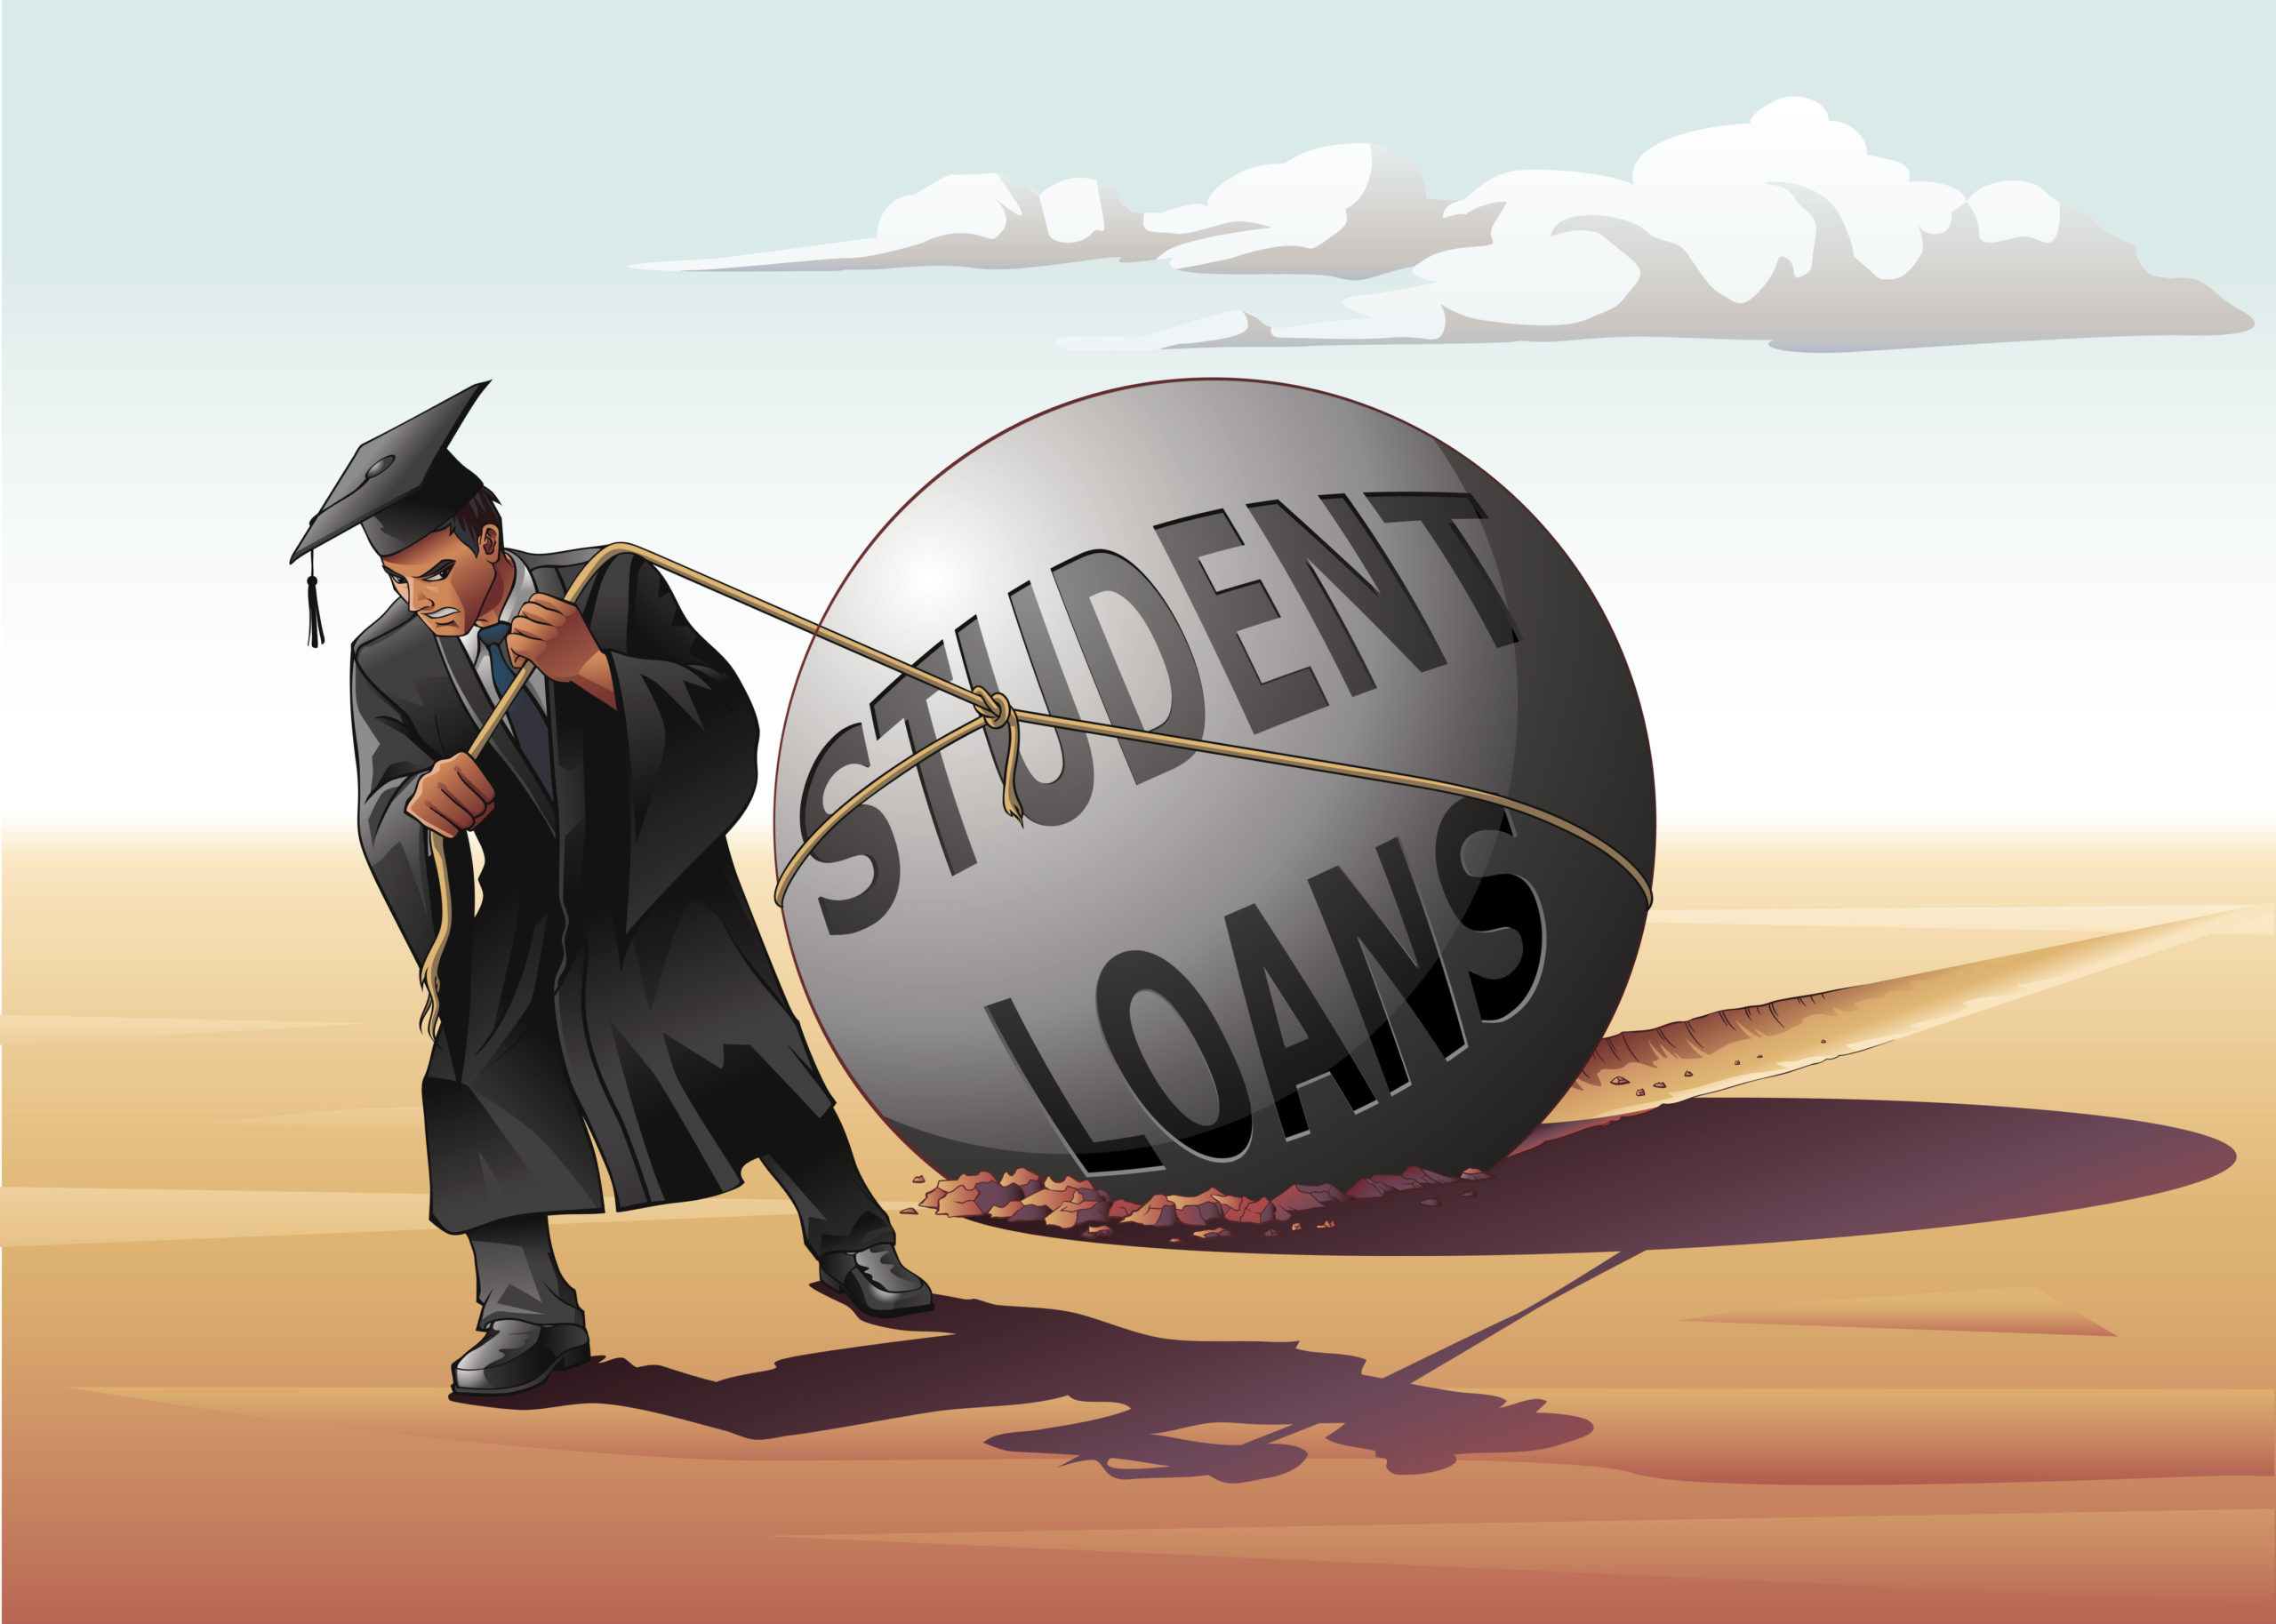 Animated: Black man in graduation garb dratting a ball and chain identified as "Student Loans"